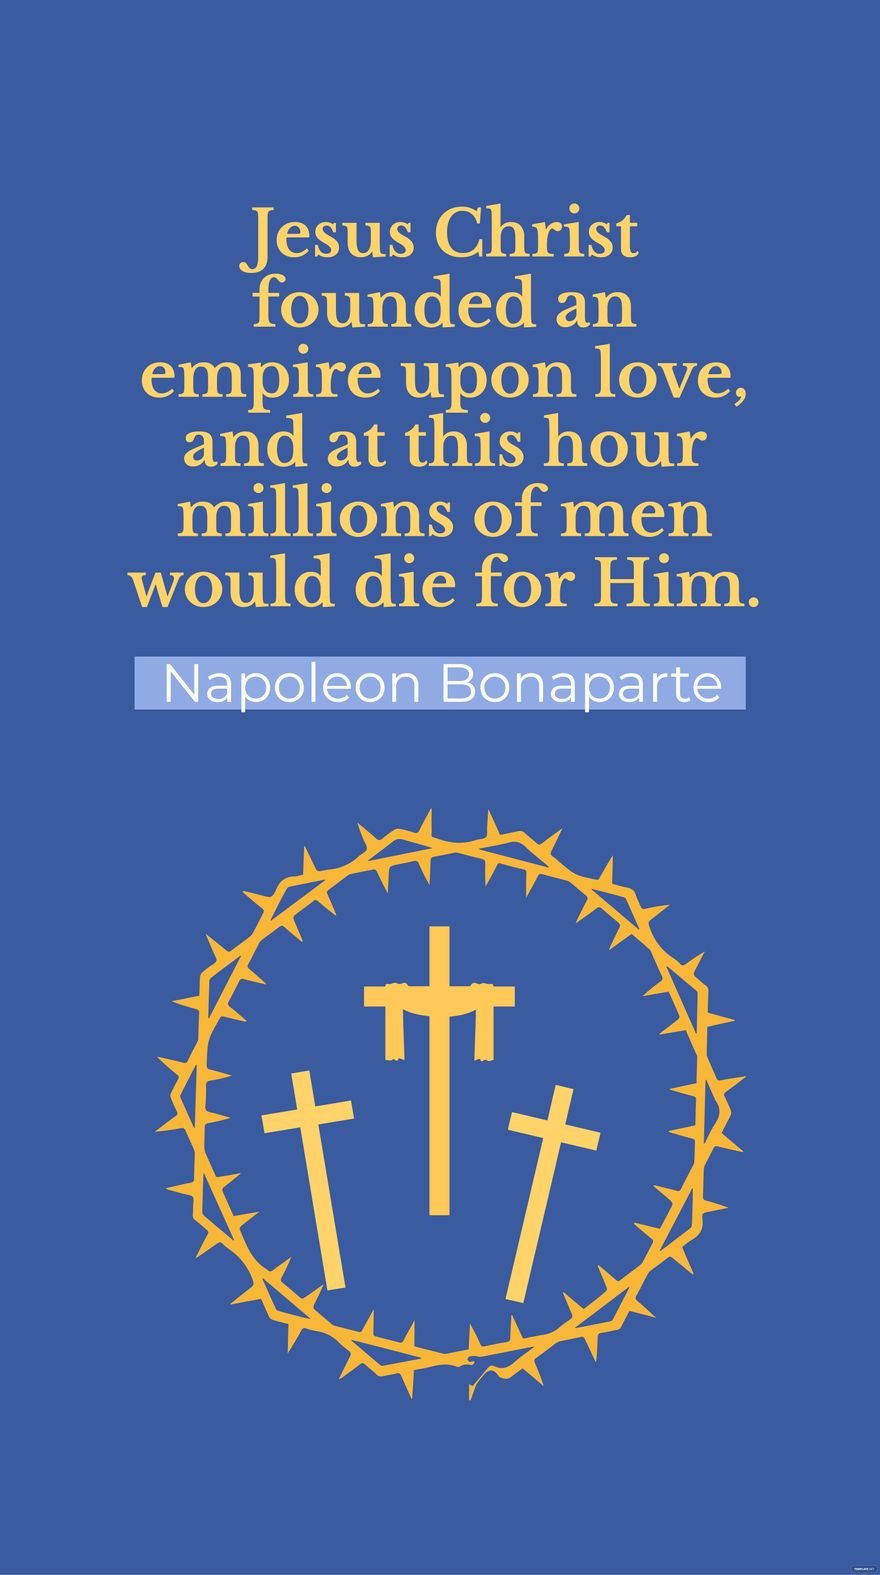 Napoleon Bonaparte - Jesus Christ founded an empire upon love, and at this hour millions of men would die for Him.